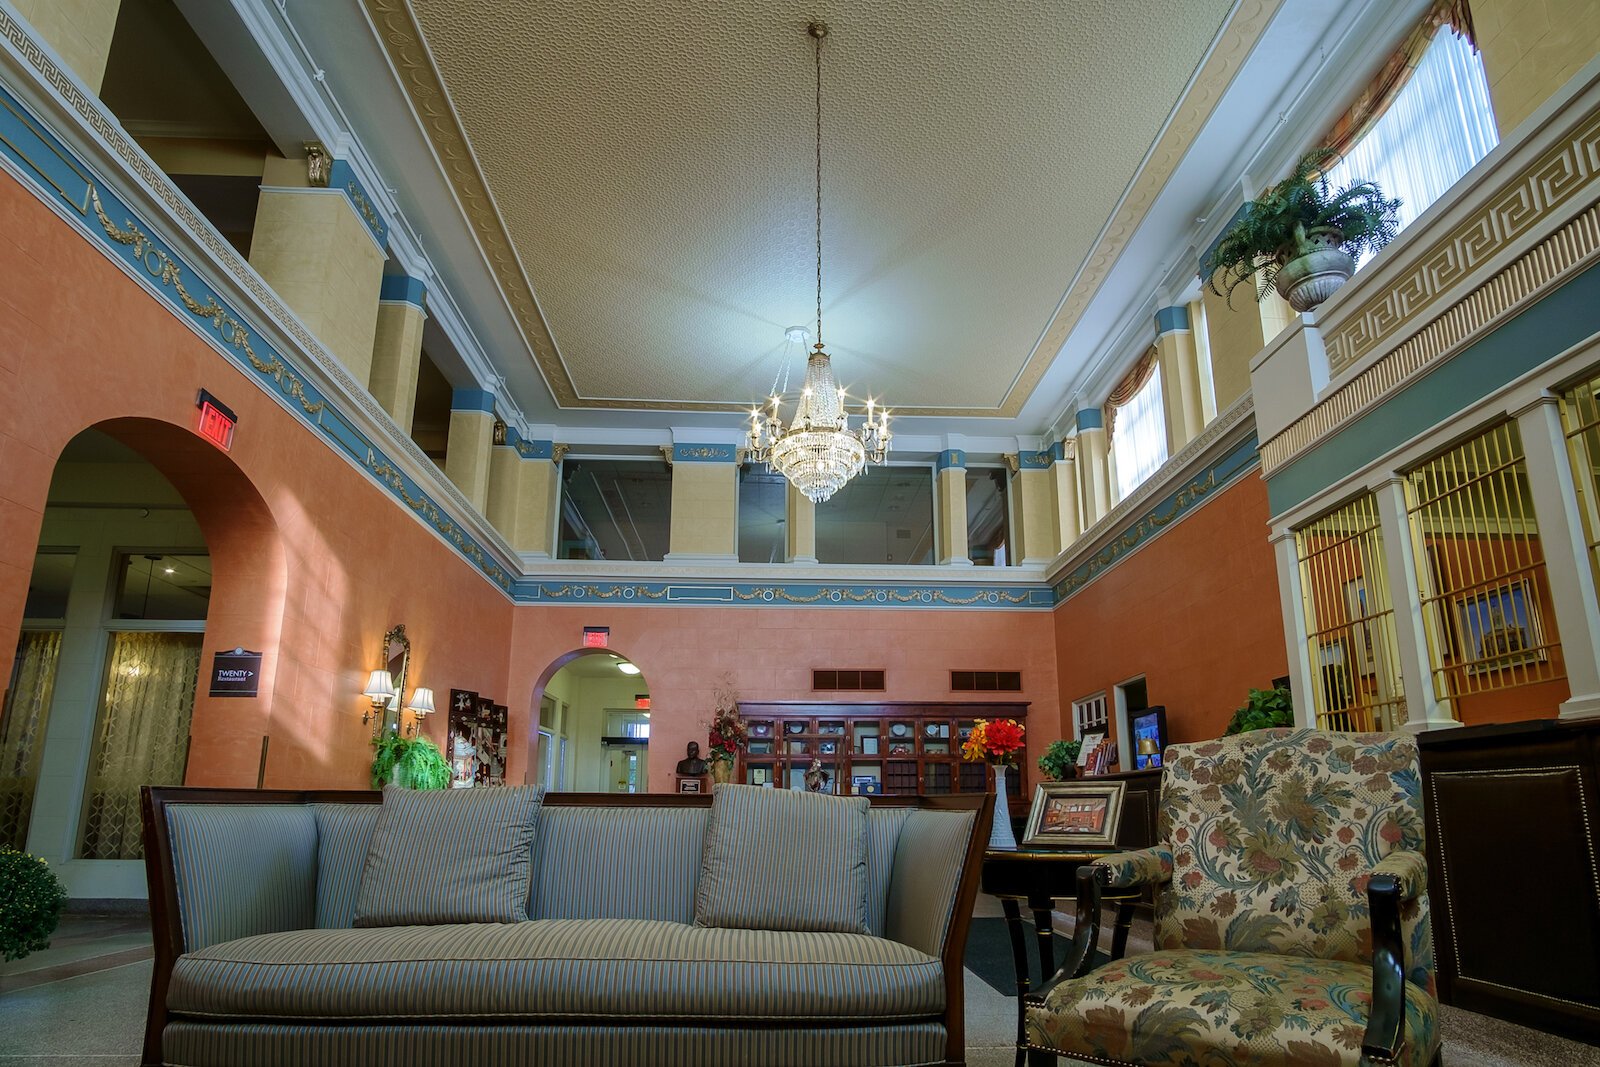 The main lobby of the Charley Creek Inn at 111 W. Market St. in Wabash.